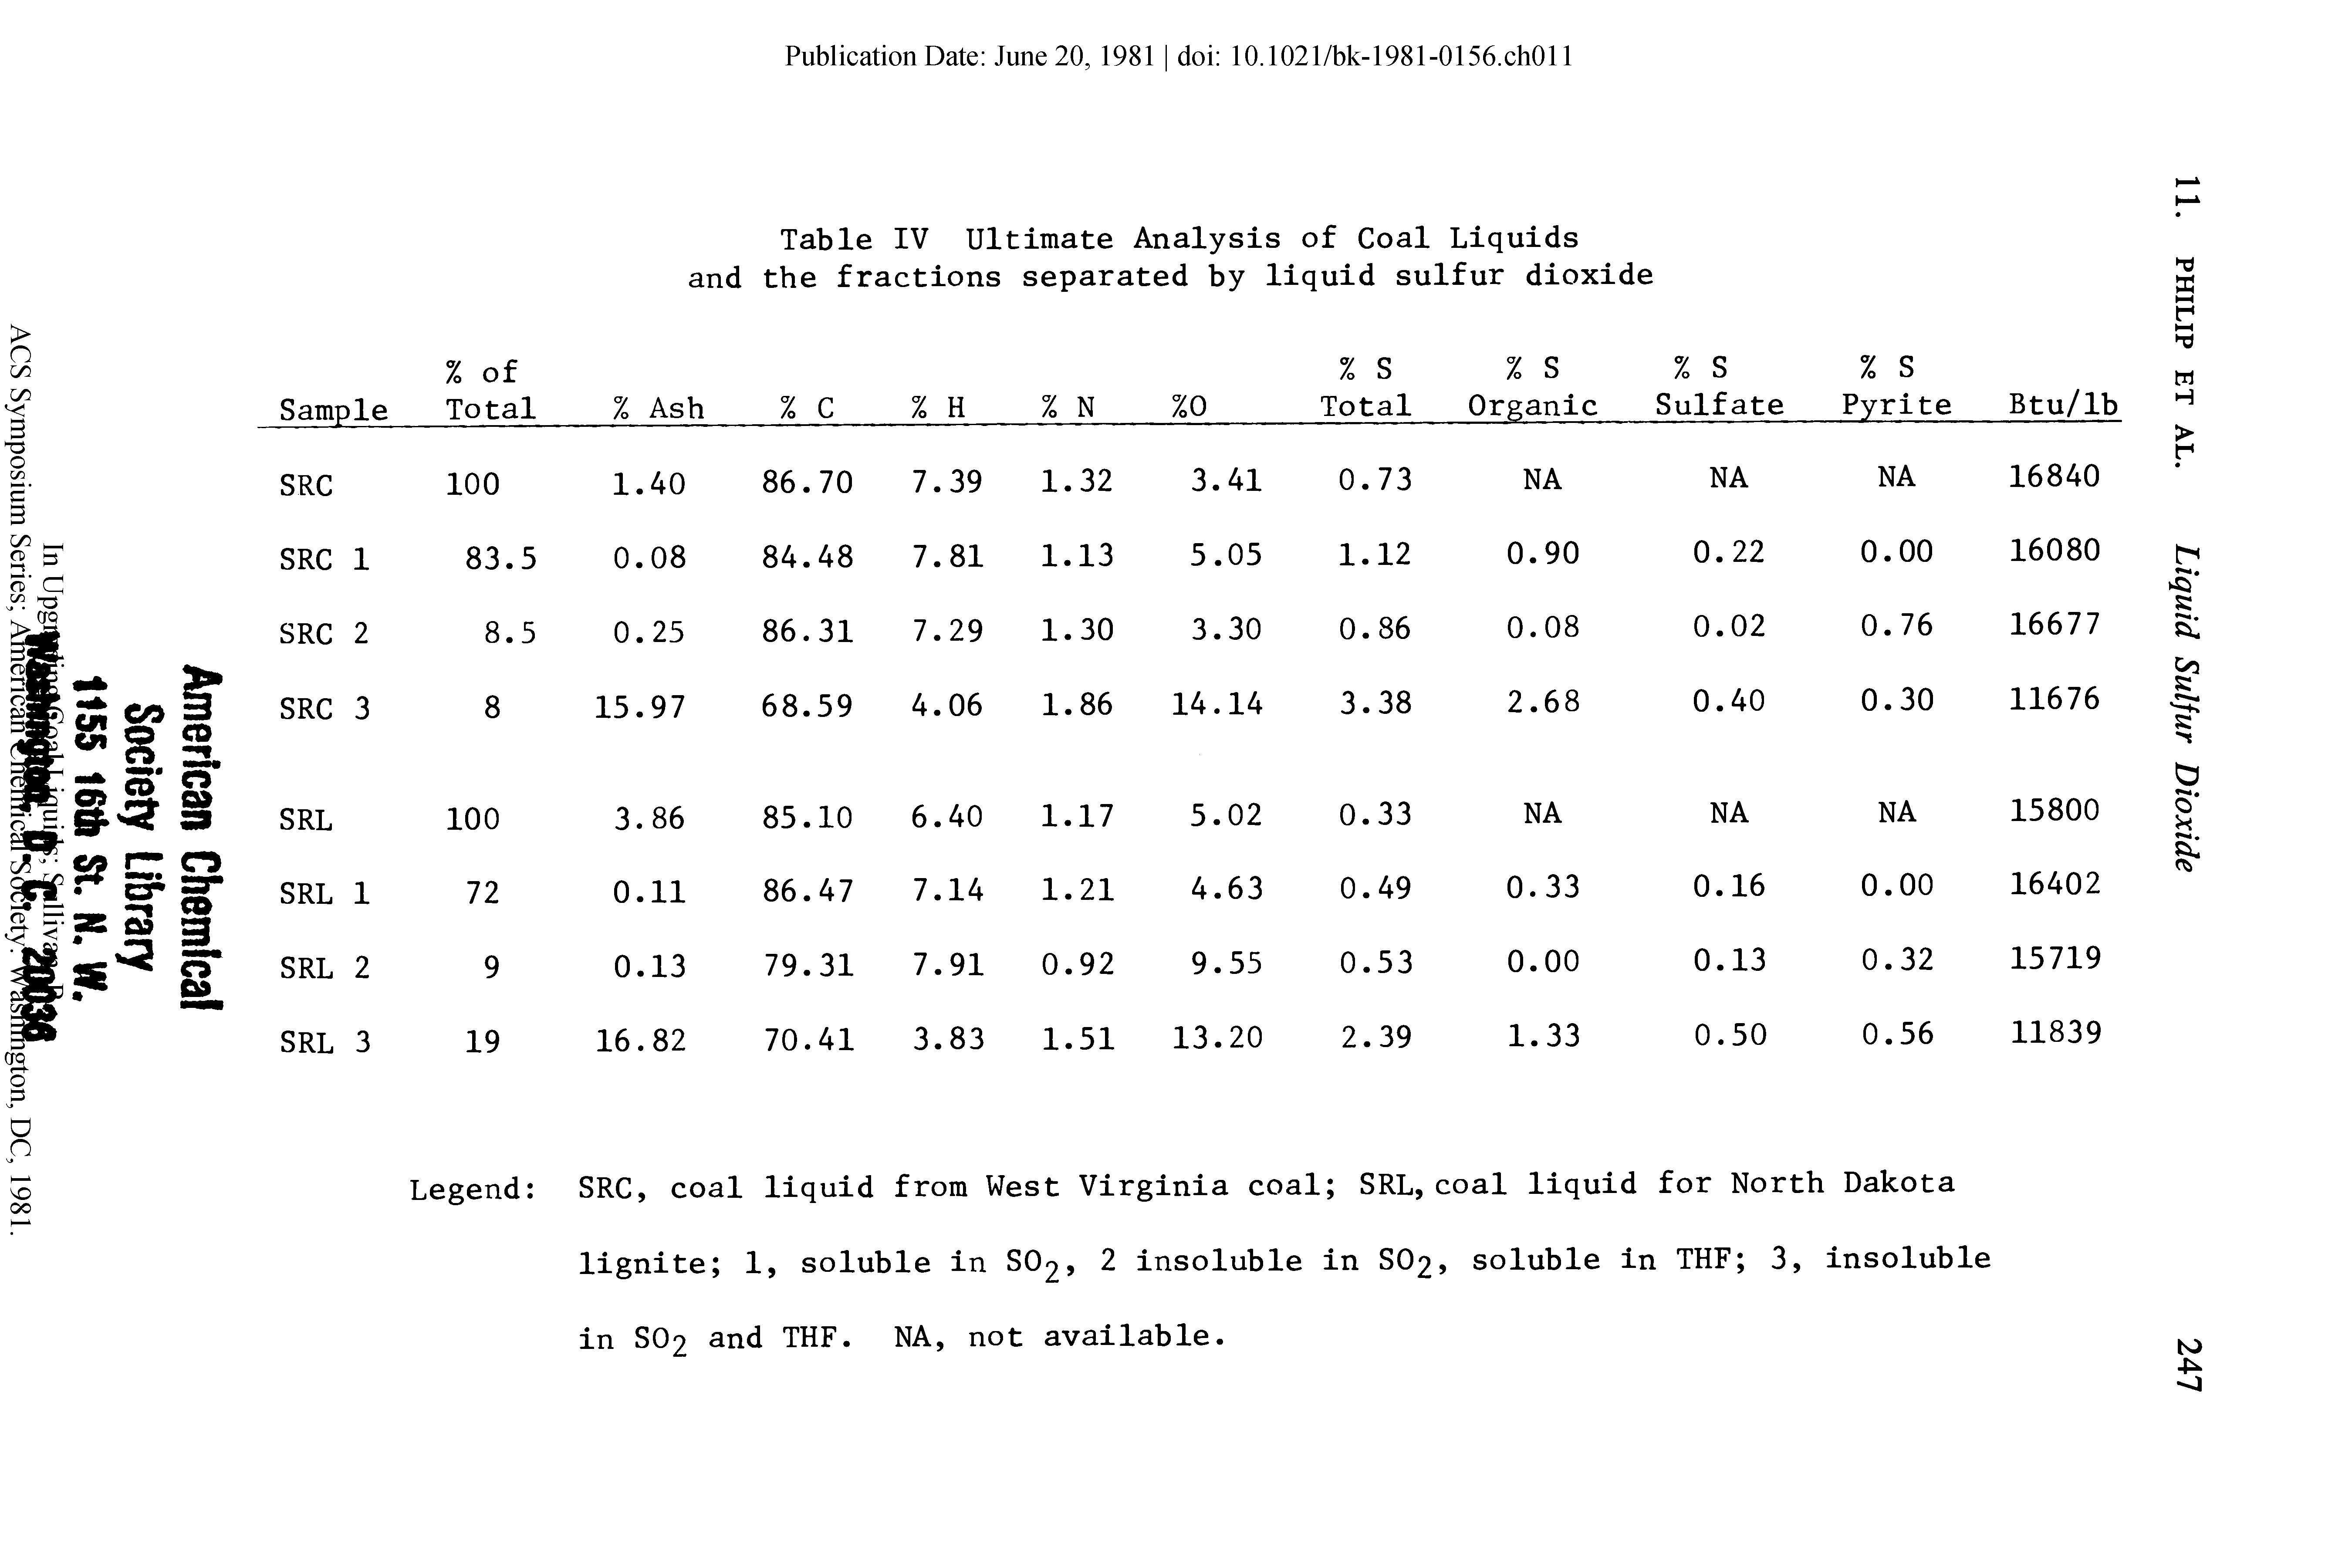 Table IV Ultimate Analysis of Coal Liquids and the fractions separated by liquid sulfur dioxide...